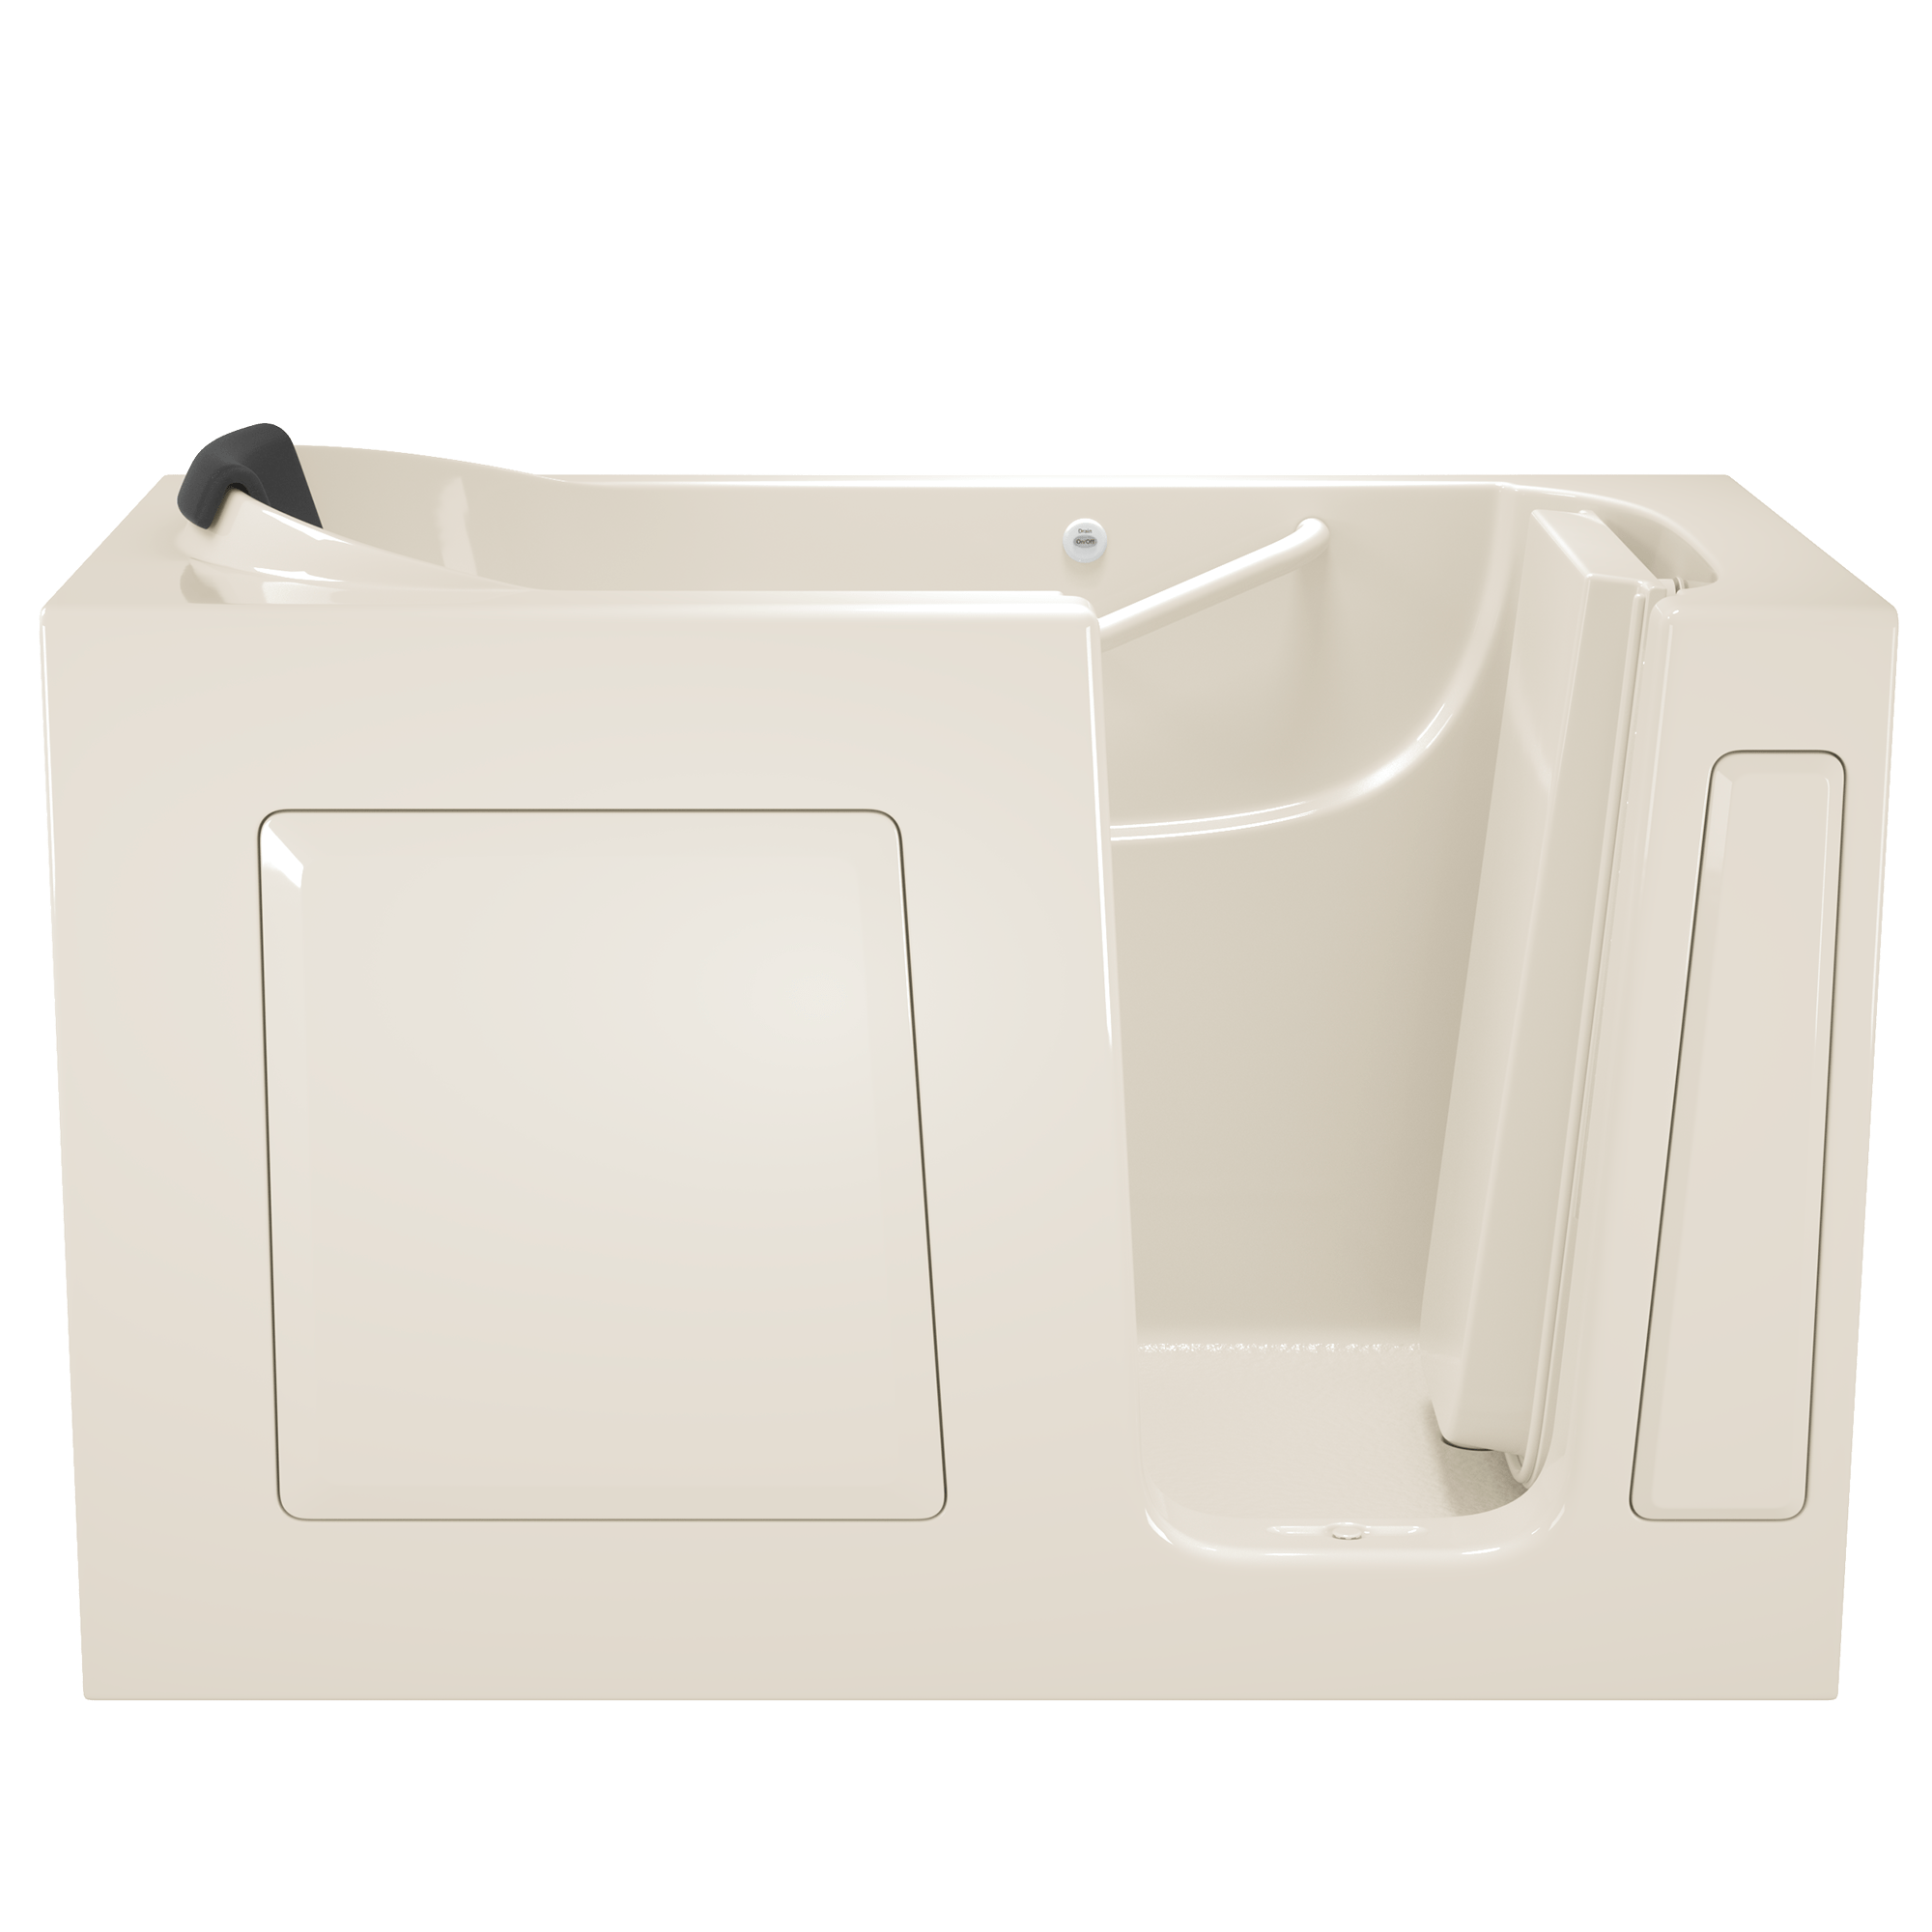 Gelcoat Premium Series 30 x 60  Inch Walk in Tub With Soaker System   Right Hand Drain WIB LINEN